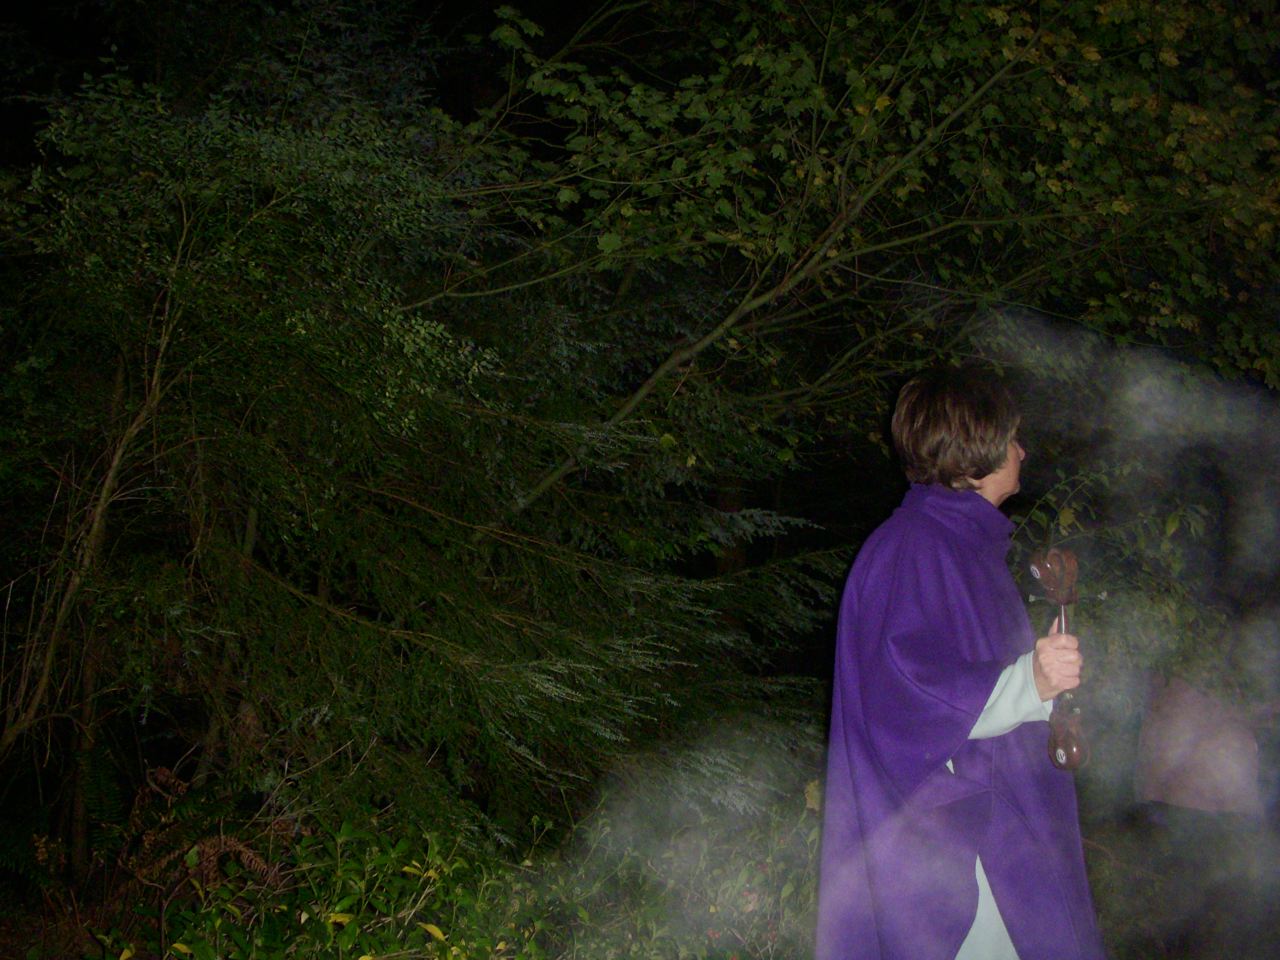 Caryl calling Orbs. This is called "plasmoid".  Looks a lot like ectoplasm doesn't it?
"Plasmoid" only showed up in pictures around me. Oregon, 2008